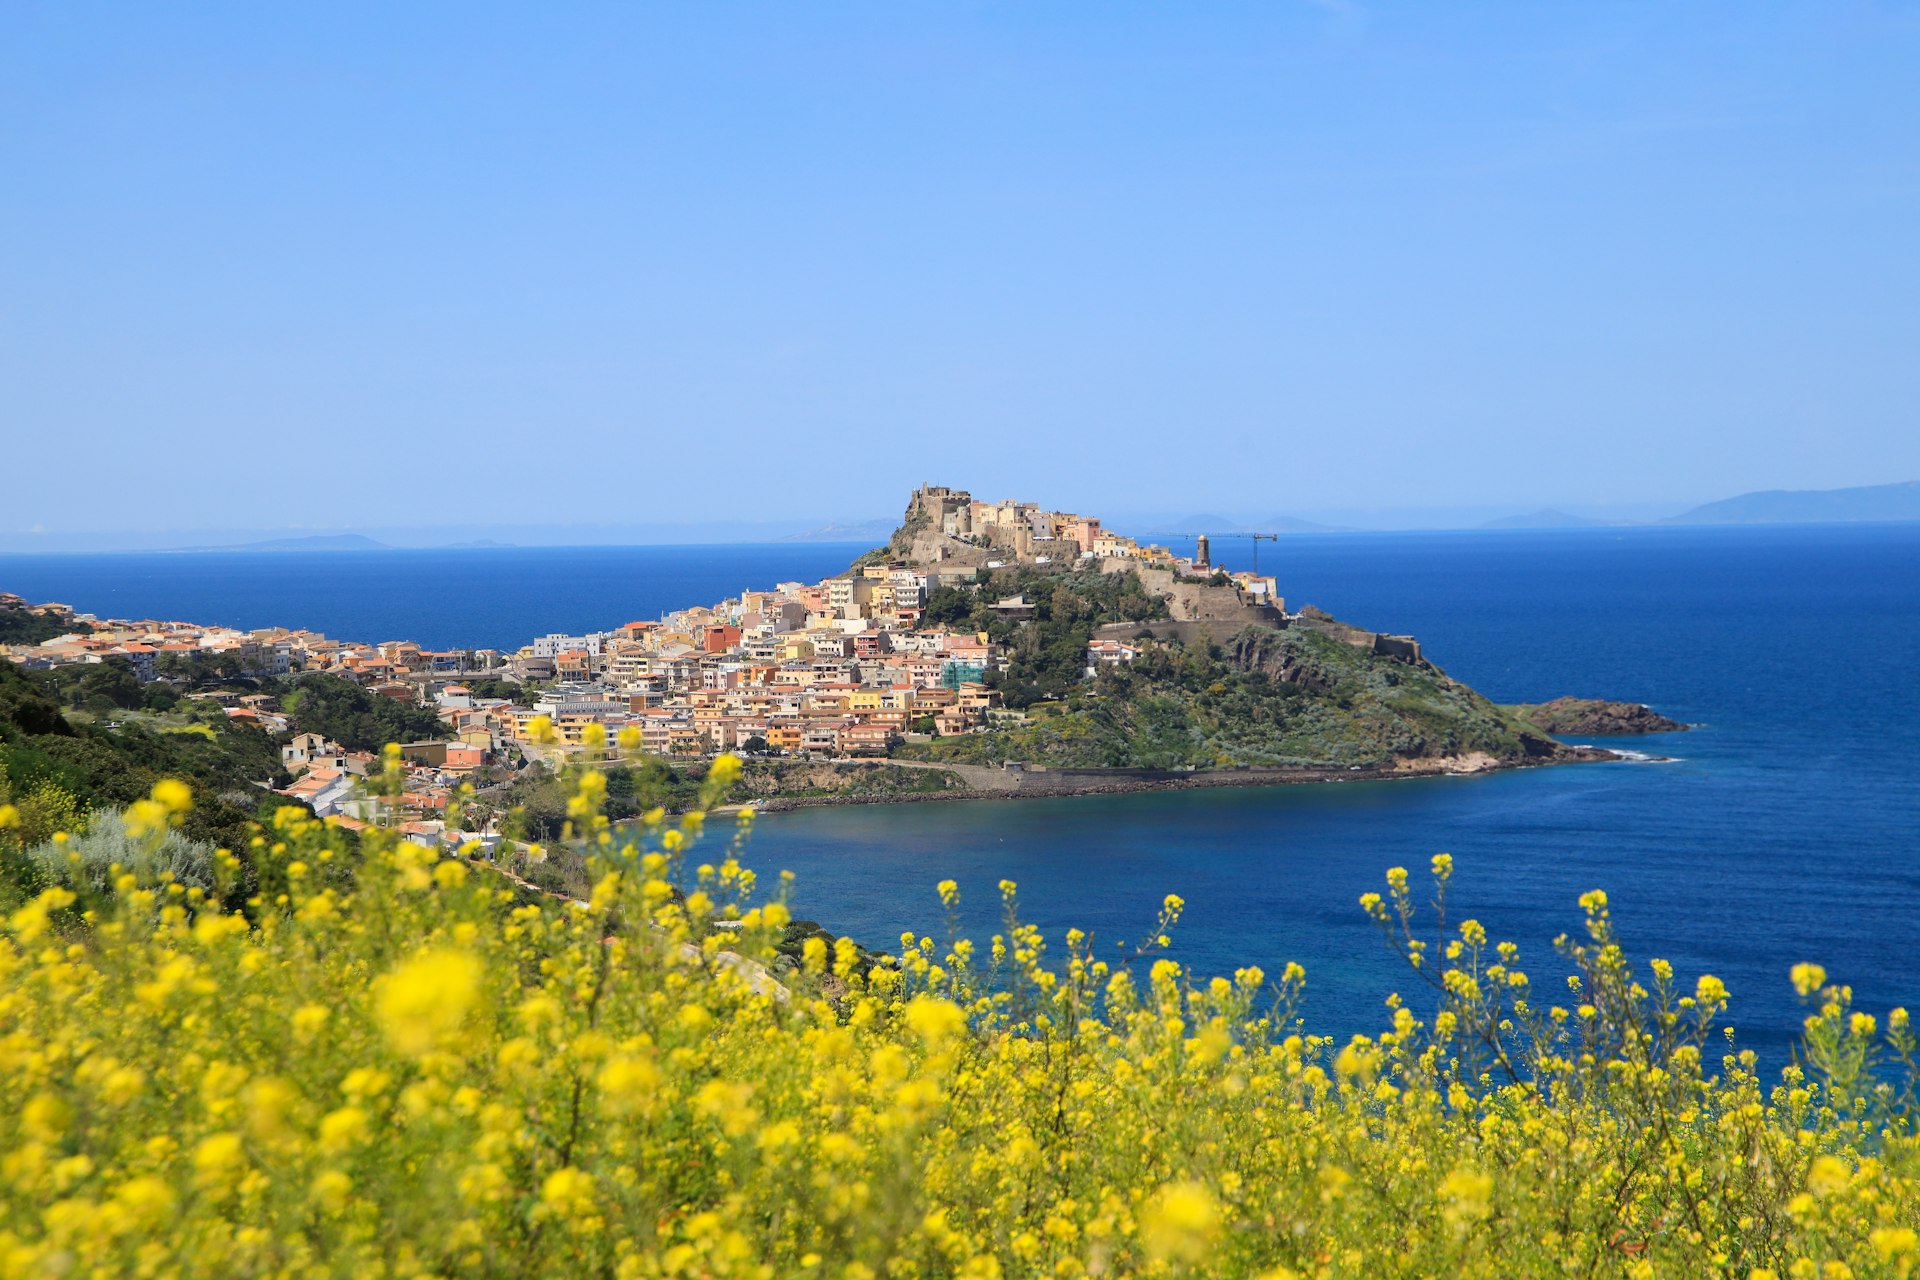 A view of yellow wildflowers with the Castello dei Doria in the distance, Sardinia, Italy